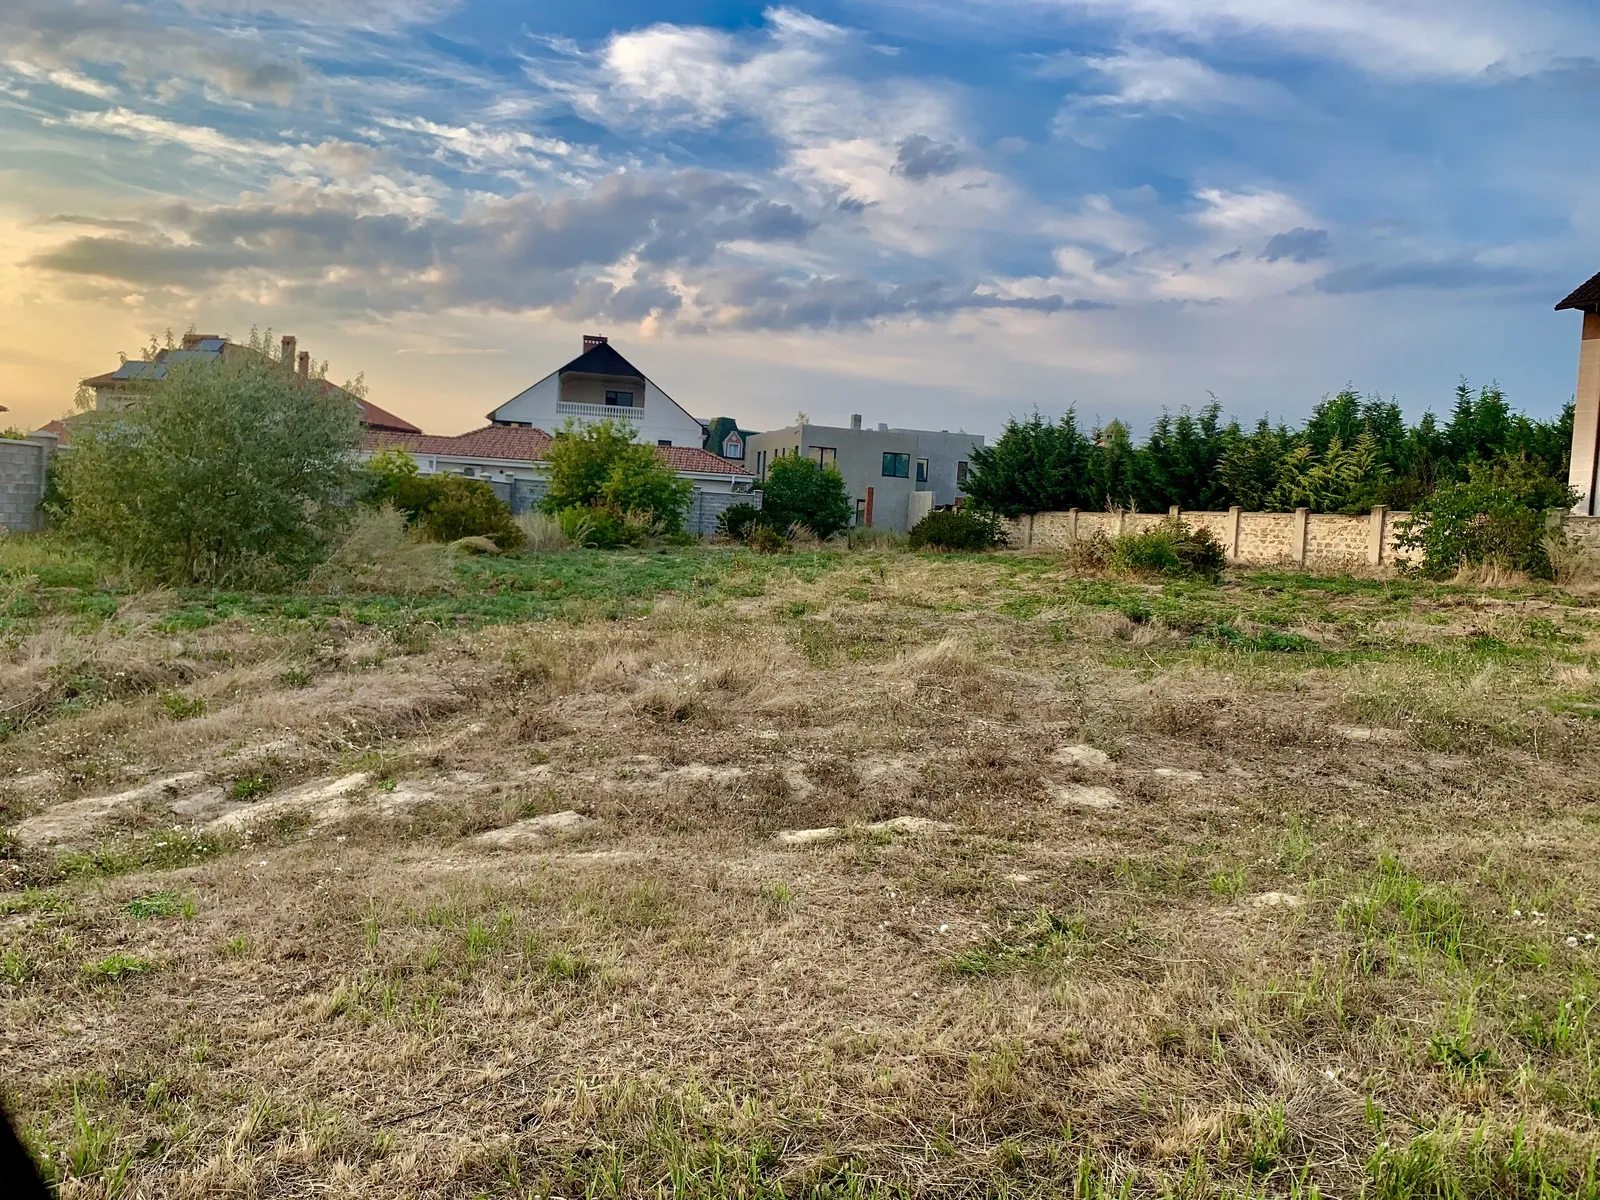 Land for sale for residential construction. Bryzova vul., Odesa. 